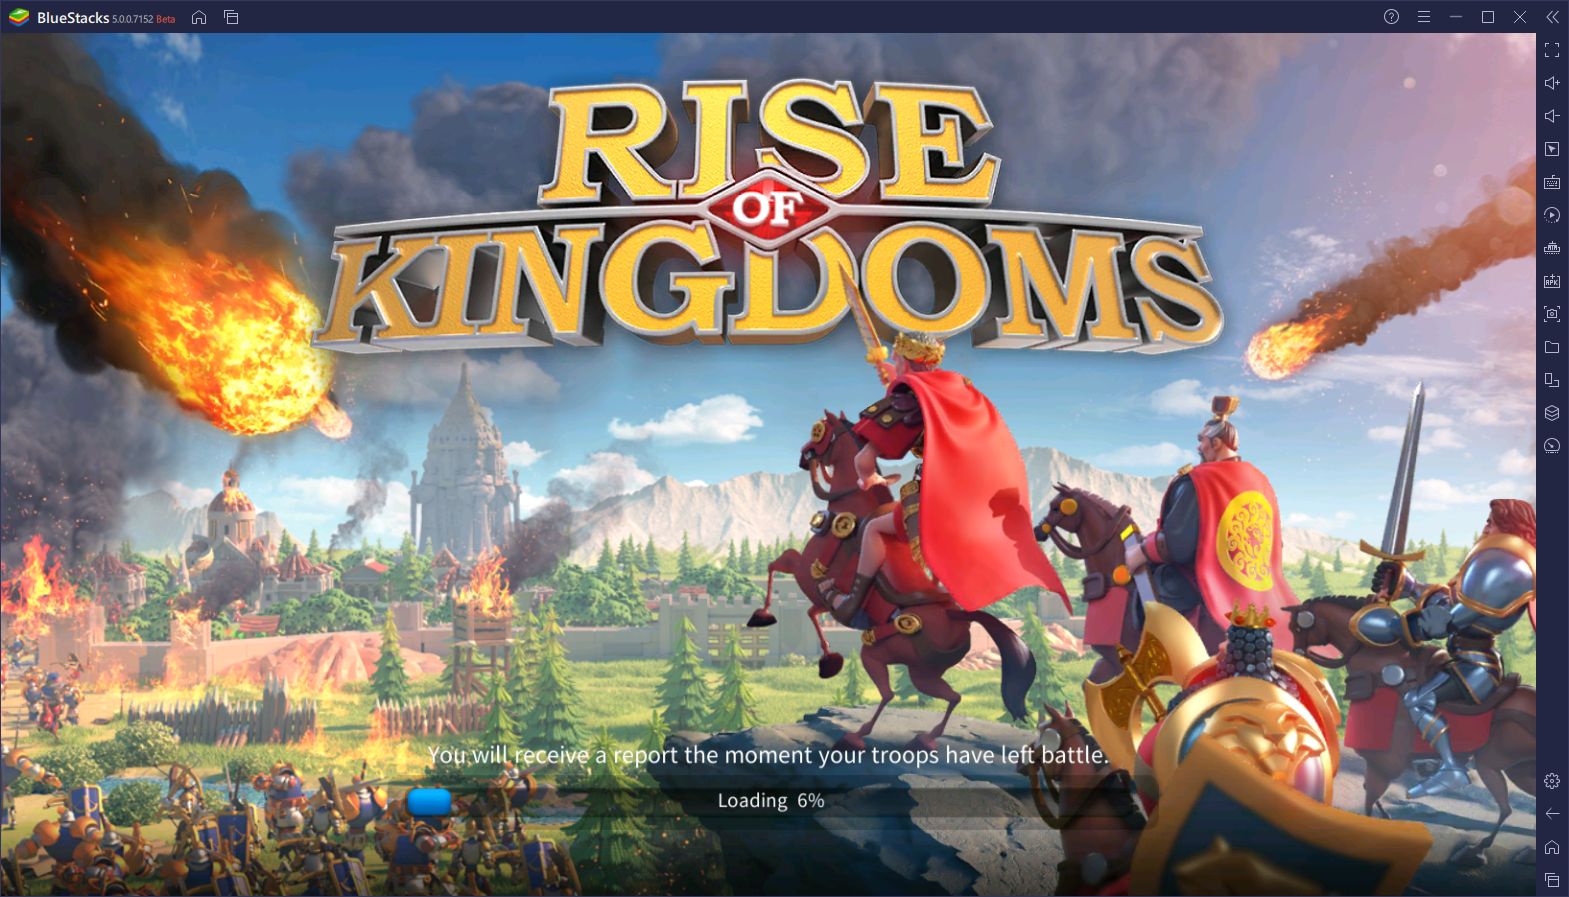 The Top Android Strategy Games to Play on BlueStacks 5